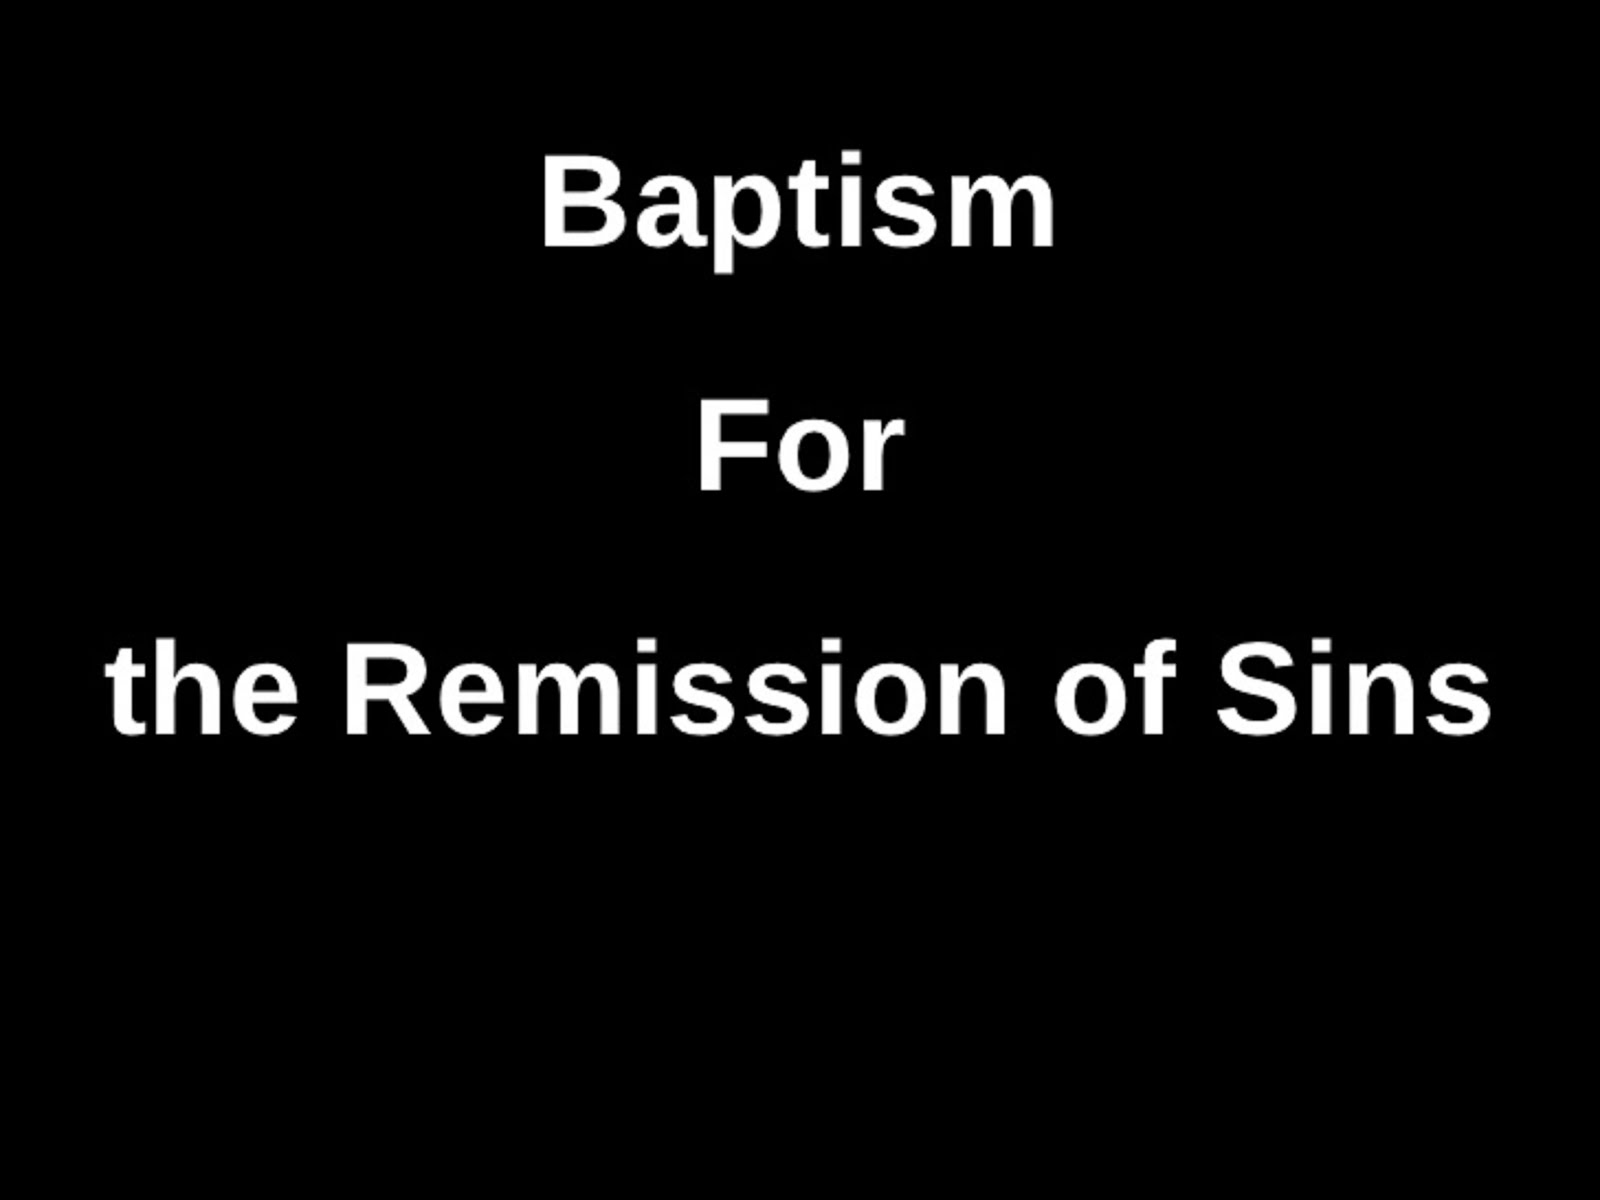 HERE IS ONE OF THE MAIN REASONS FOR YOUR BAPTISM